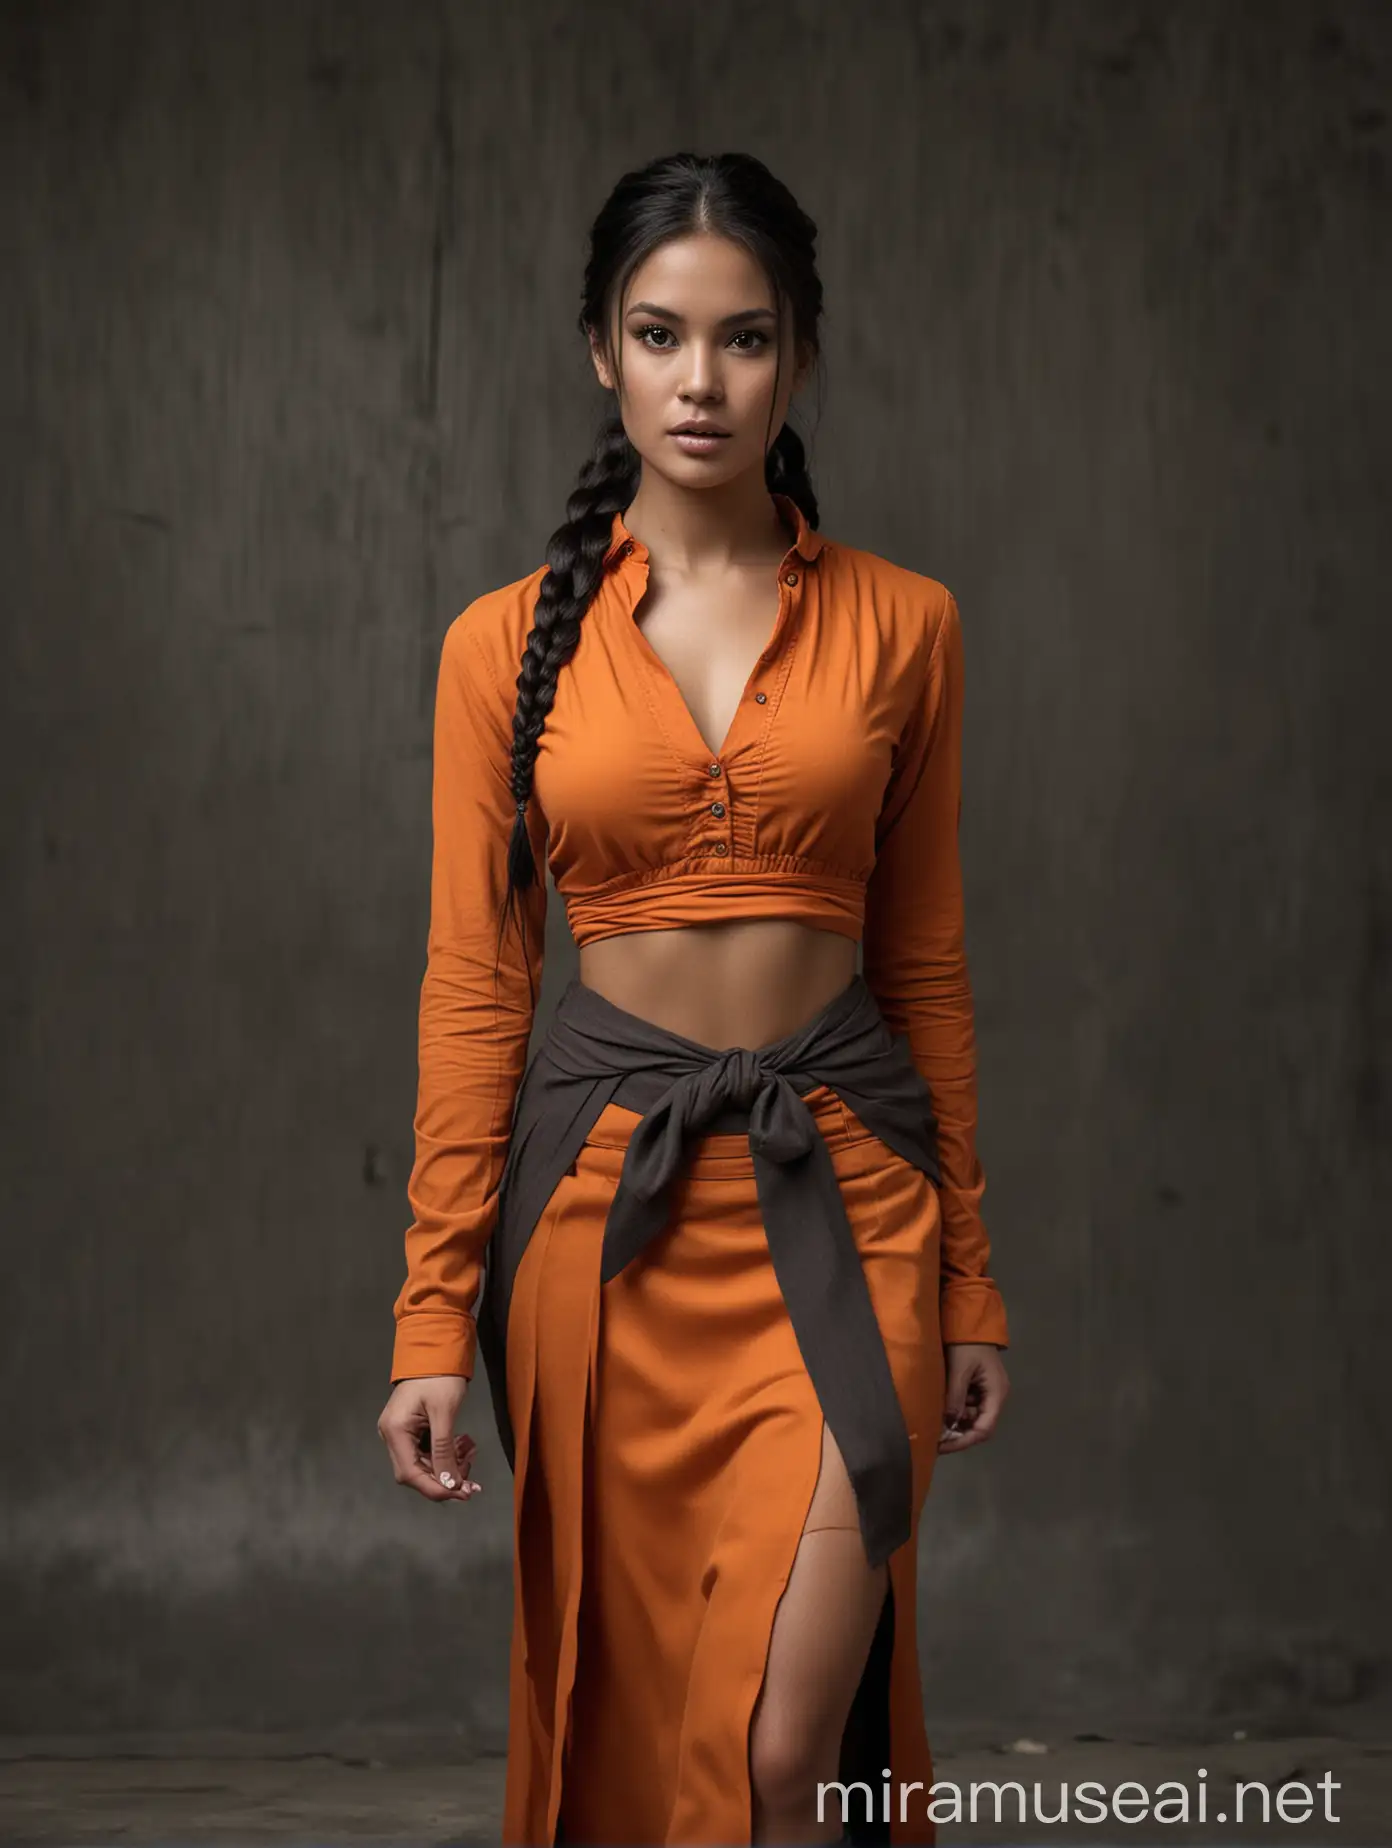 Peruvian Woman with Long Braided Hair in Cinematic Orange Dress